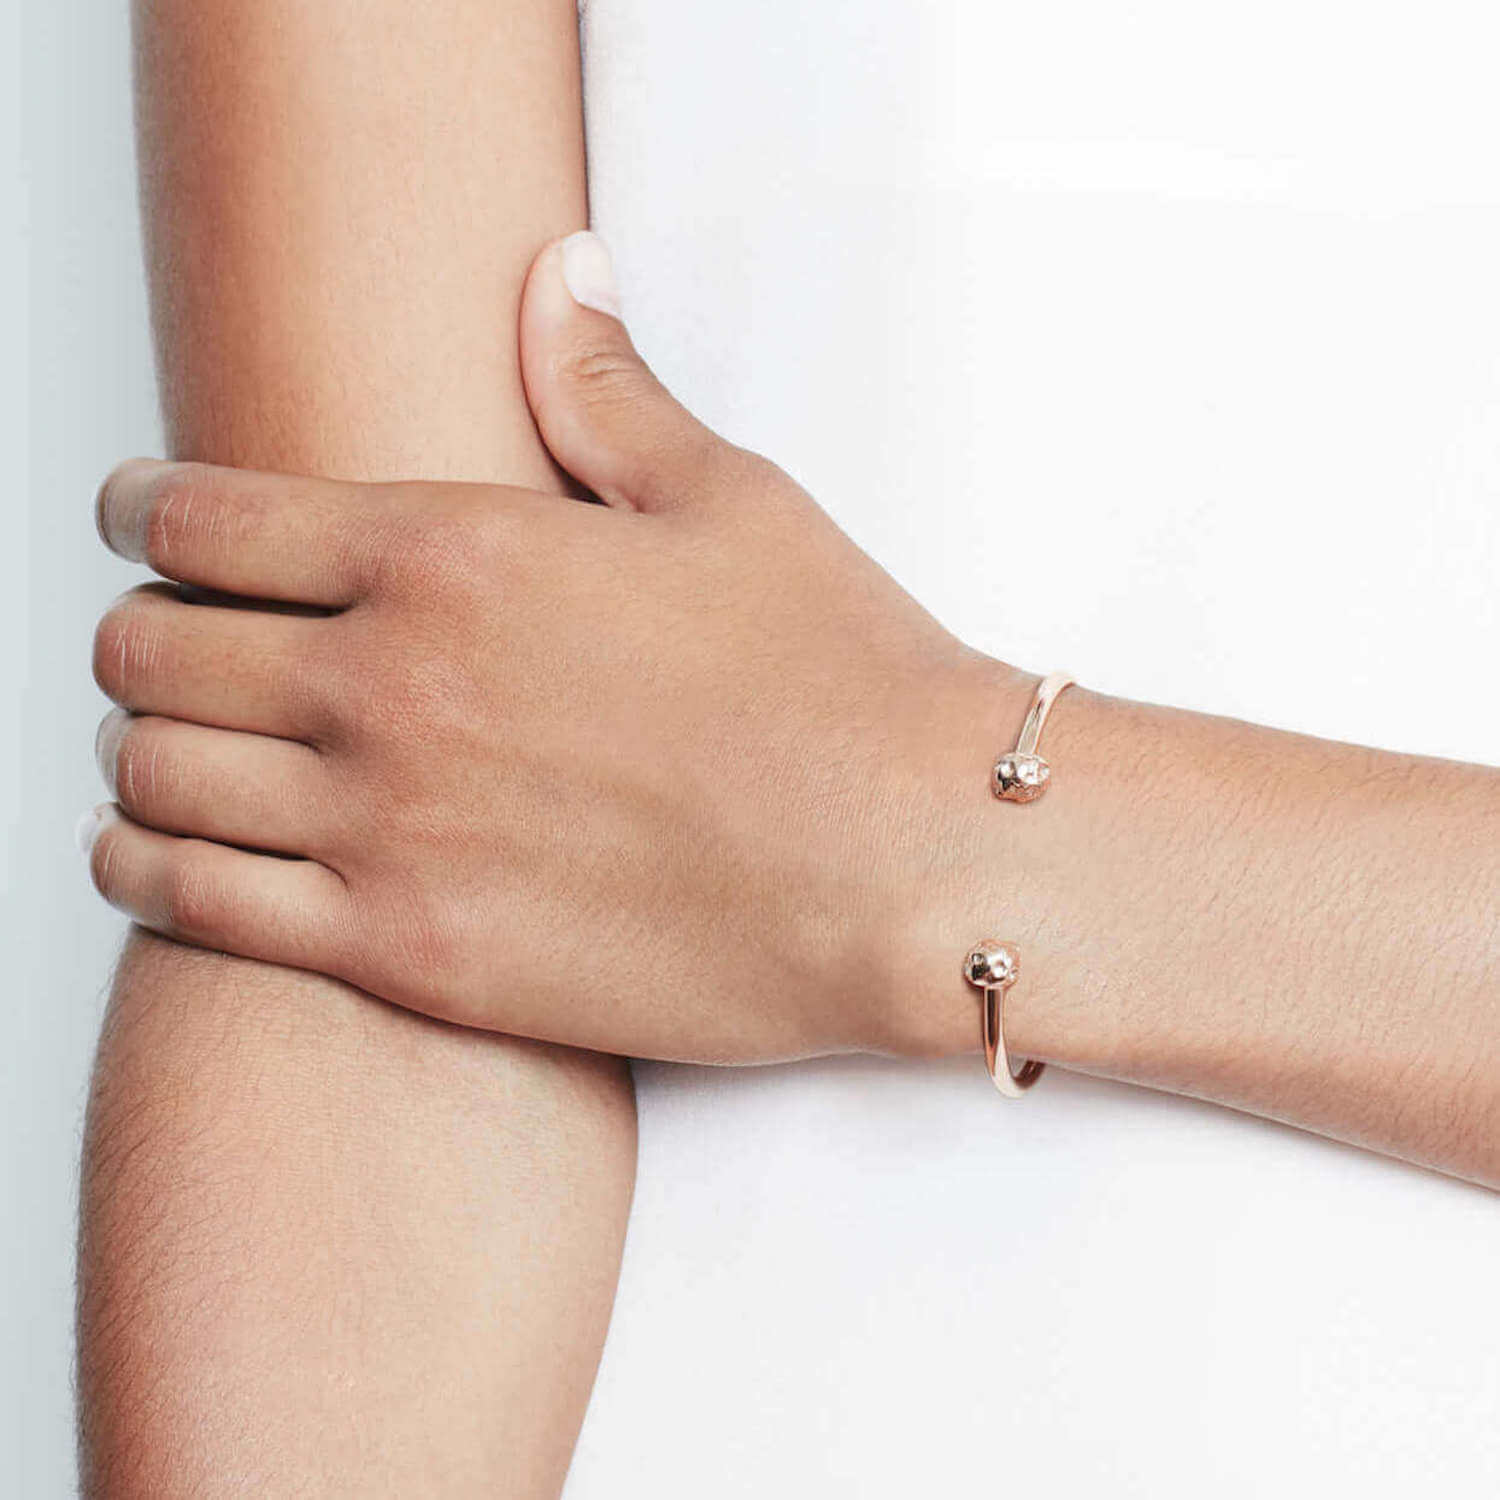 Model wearing double meteorite bangle with textured charms